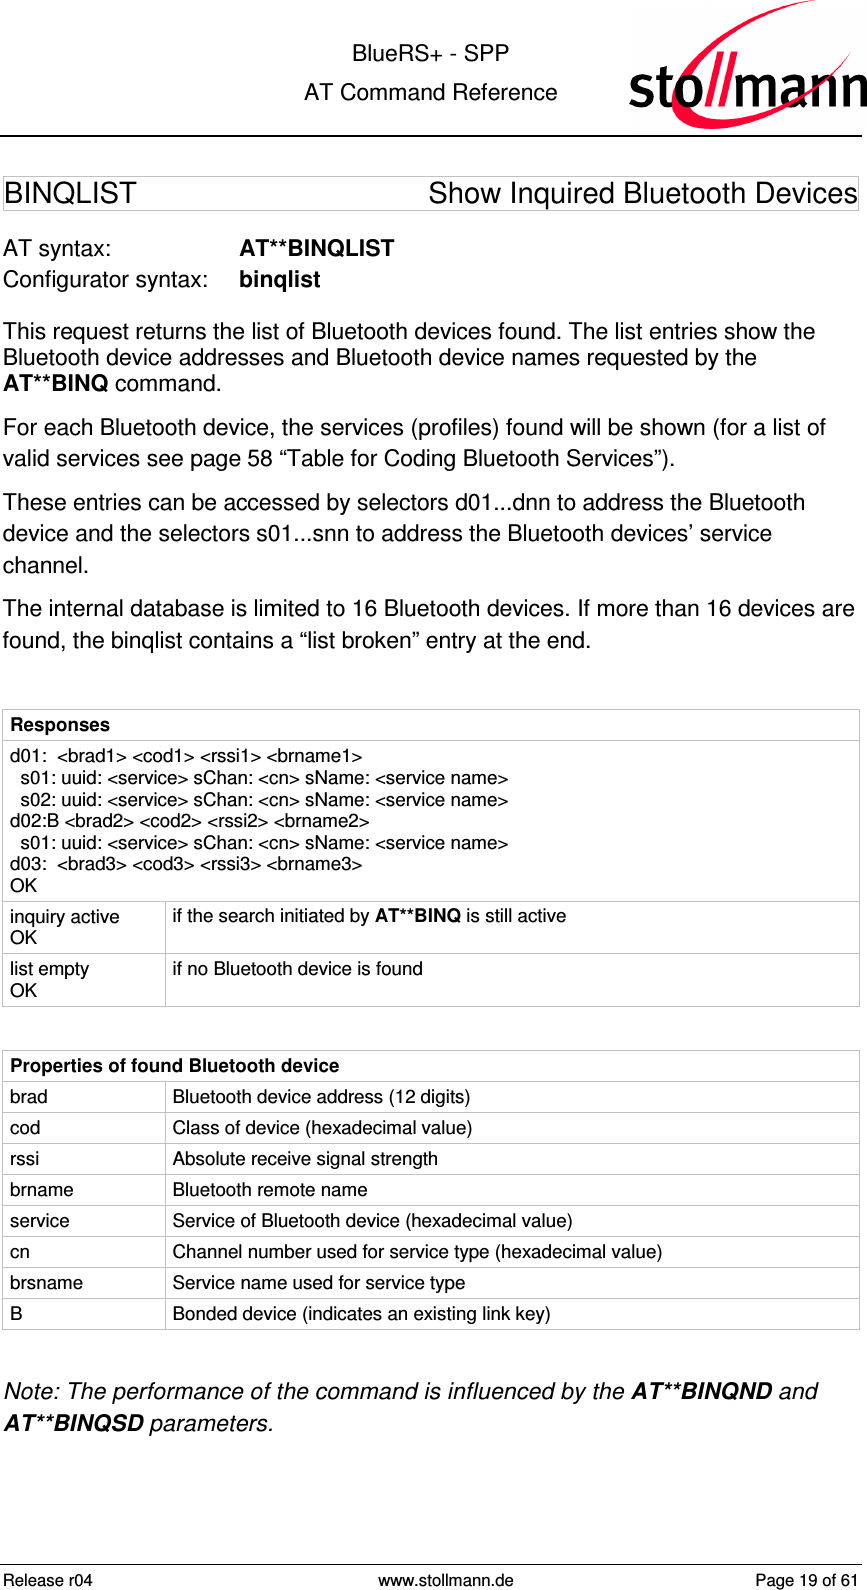  BlueRS+ - SPP AT Command Reference Release r04  www.stollmann.de  Page 19 of 61  BINQLIST  Show Inquired Bluetooth Devices AT syntax:  AT**BINQLIST Configurator syntax:  binqlist This request returns the list of Bluetooth devices found. The list entries show the Bluetooth device addresses and Bluetooth device names requested by the AT**BINQ command.  For each Bluetooth device, the services (profiles) found will be shown (for a list of valid services see page 58 “Table for Coding Bluetooth Services”). These entries can be accessed by selectors d01...dnn to address the Bluetooth device and the selectors s01...snn to address the Bluetooth devices’ service channel. The internal database is limited to 16 Bluetooth devices. If more than 16 devices are found, the binqlist contains a “list broken” entry at the end.  Responses d01:  &lt;brad1&gt; &lt;cod1&gt; &lt;rssi1&gt; &lt;brname1&gt;   s01: uuid: &lt;service&gt; sChan: &lt;cn&gt; sName: &lt;service name&gt;   s02: uuid: &lt;service&gt; sChan: &lt;cn&gt; sName: &lt;service name&gt; d02:B &lt;brad2&gt; &lt;cod2&gt; &lt;rssi2&gt; &lt;brname2&gt;   s01: uuid: &lt;service&gt; sChan: &lt;cn&gt; sName: &lt;service name&gt; d03:  &lt;brad3&gt; &lt;cod3&gt; &lt;rssi3&gt; &lt;brname3&gt; OK inquiry active OK  if the search initiated by AT**BINQ is still active list empty OK  if no Bluetooth device is found  Properties of found Bluetooth device brad  Bluetooth device address (12 digits) cod  Class of device (hexadecimal value) rssi  Absolute receive signal strength brname  Bluetooth remote name service  Service of Bluetooth device (hexadecimal value) cn  Channel number used for service type (hexadecimal value) brsname  Service name used for service type B  Bonded device (indicates an existing link key)  Note: The performance of the command is influenced by the AT**BINQND and AT**BINQSD parameters.  